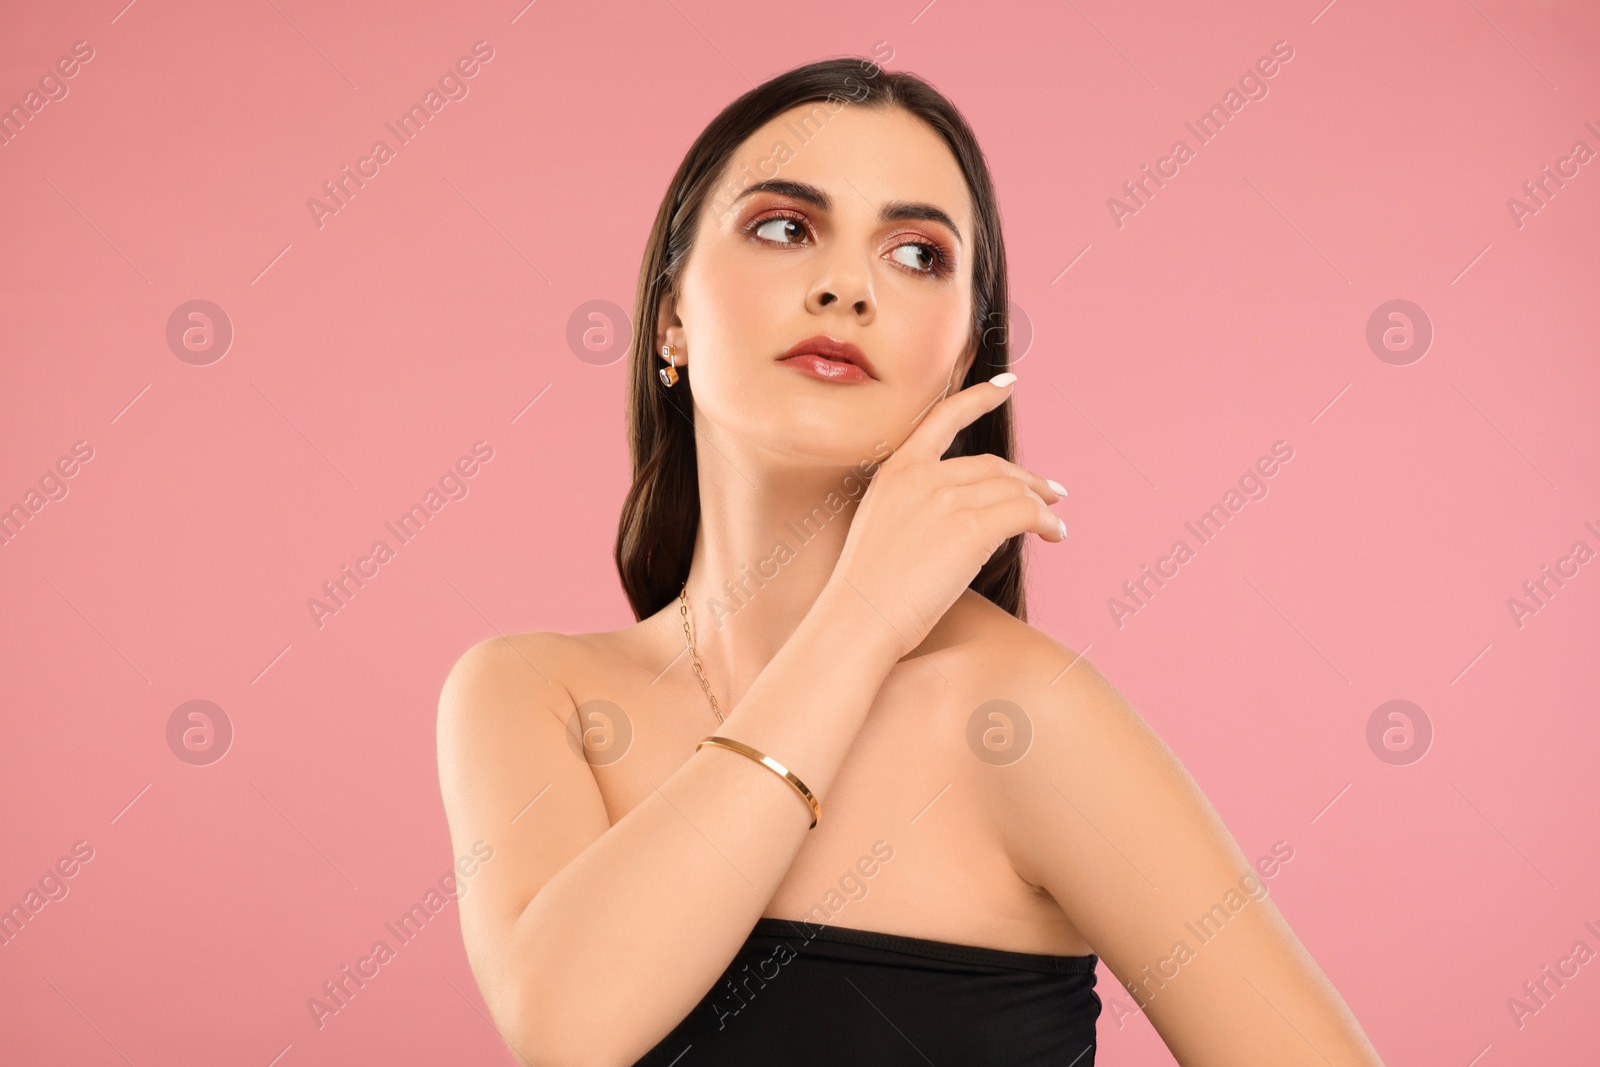 Photo of Beautiful woman with elegant jewelry on pink background